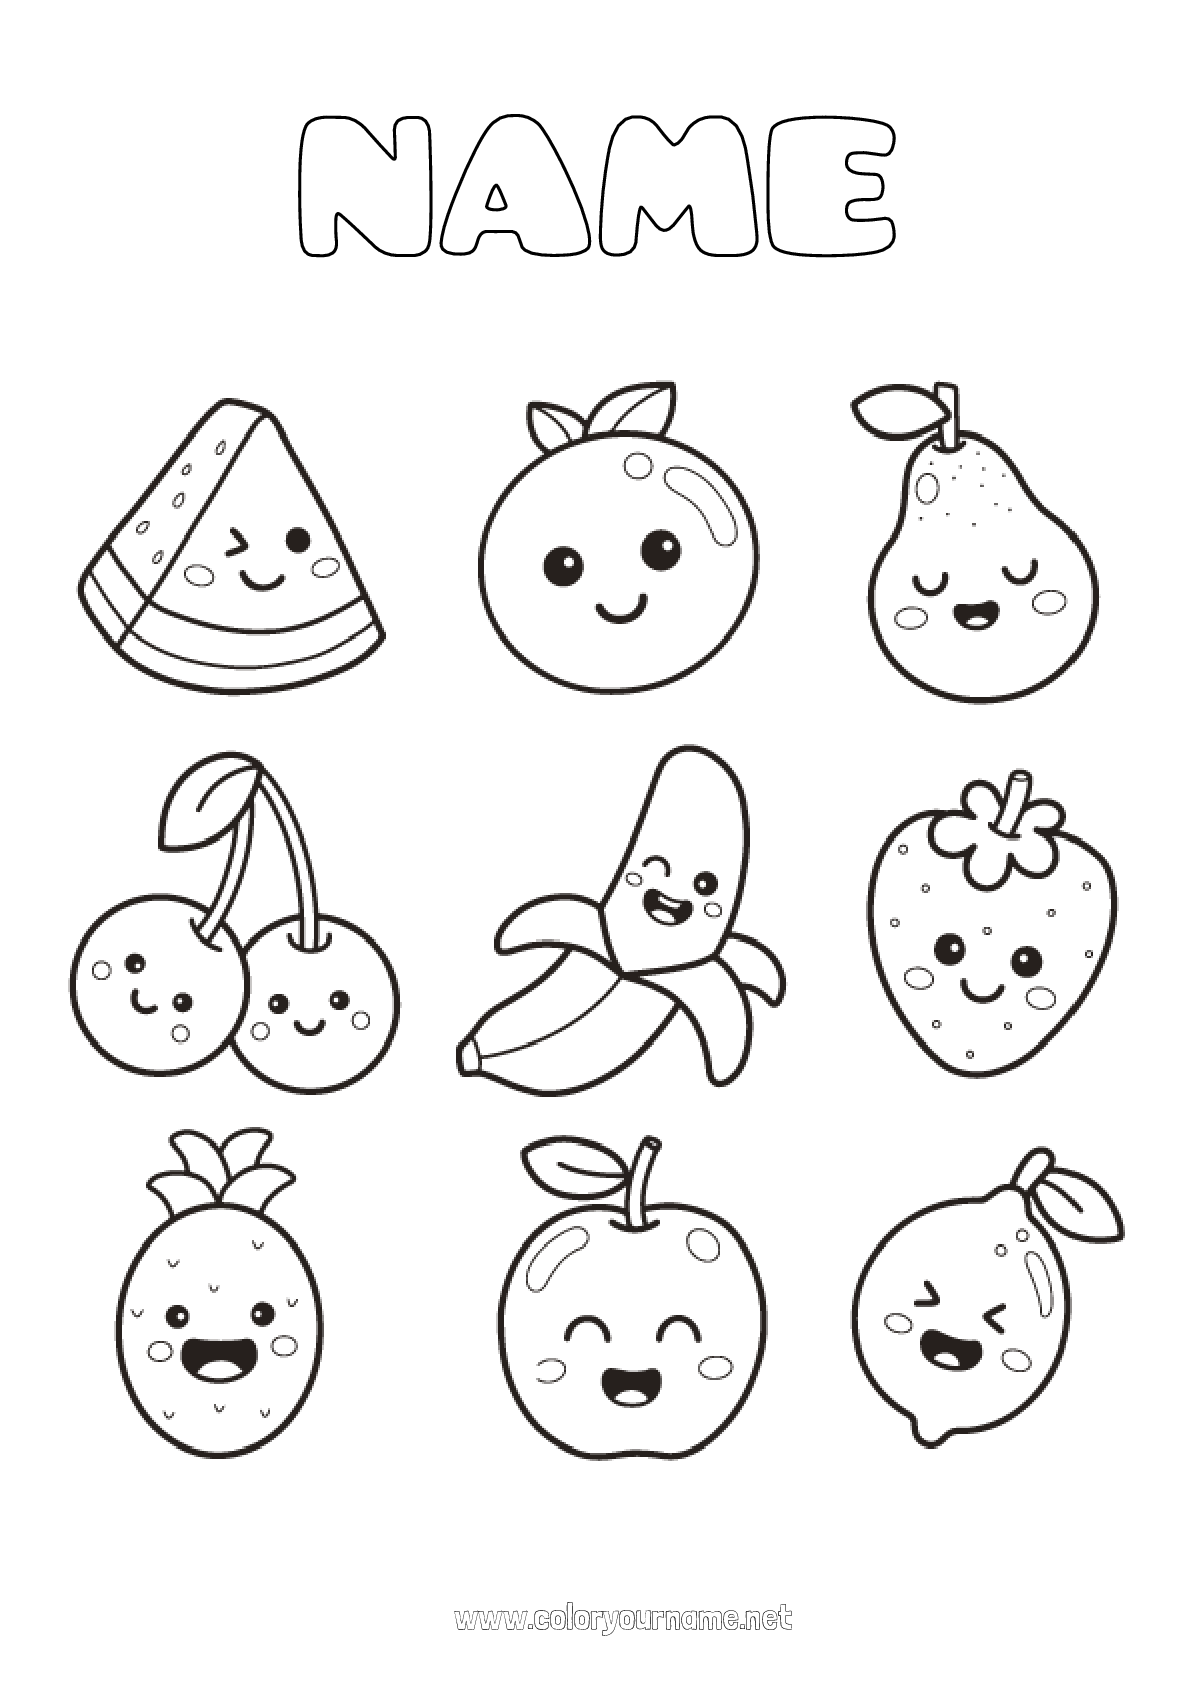 Hand Drawn Doodle Fruits Name Vector Stock Vector (Royalty Free) 320417537  | Shutterstock